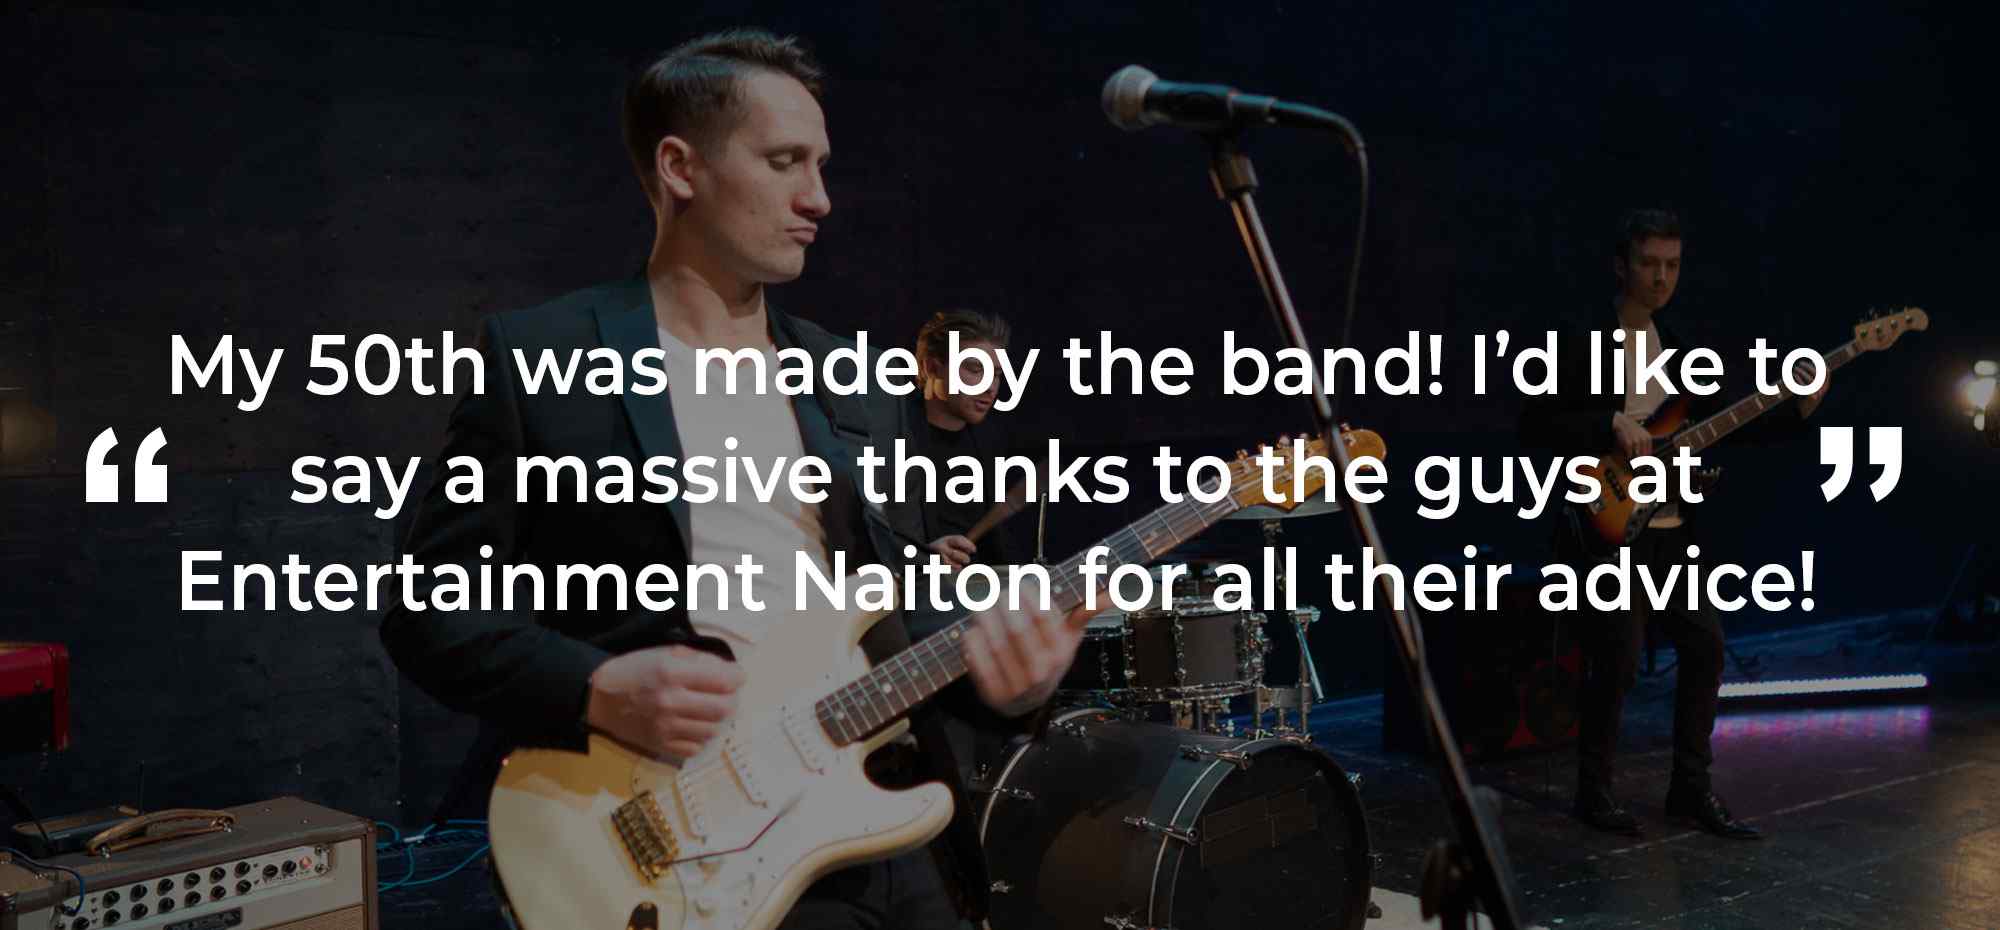 Client Review of a Party Band West Sussex